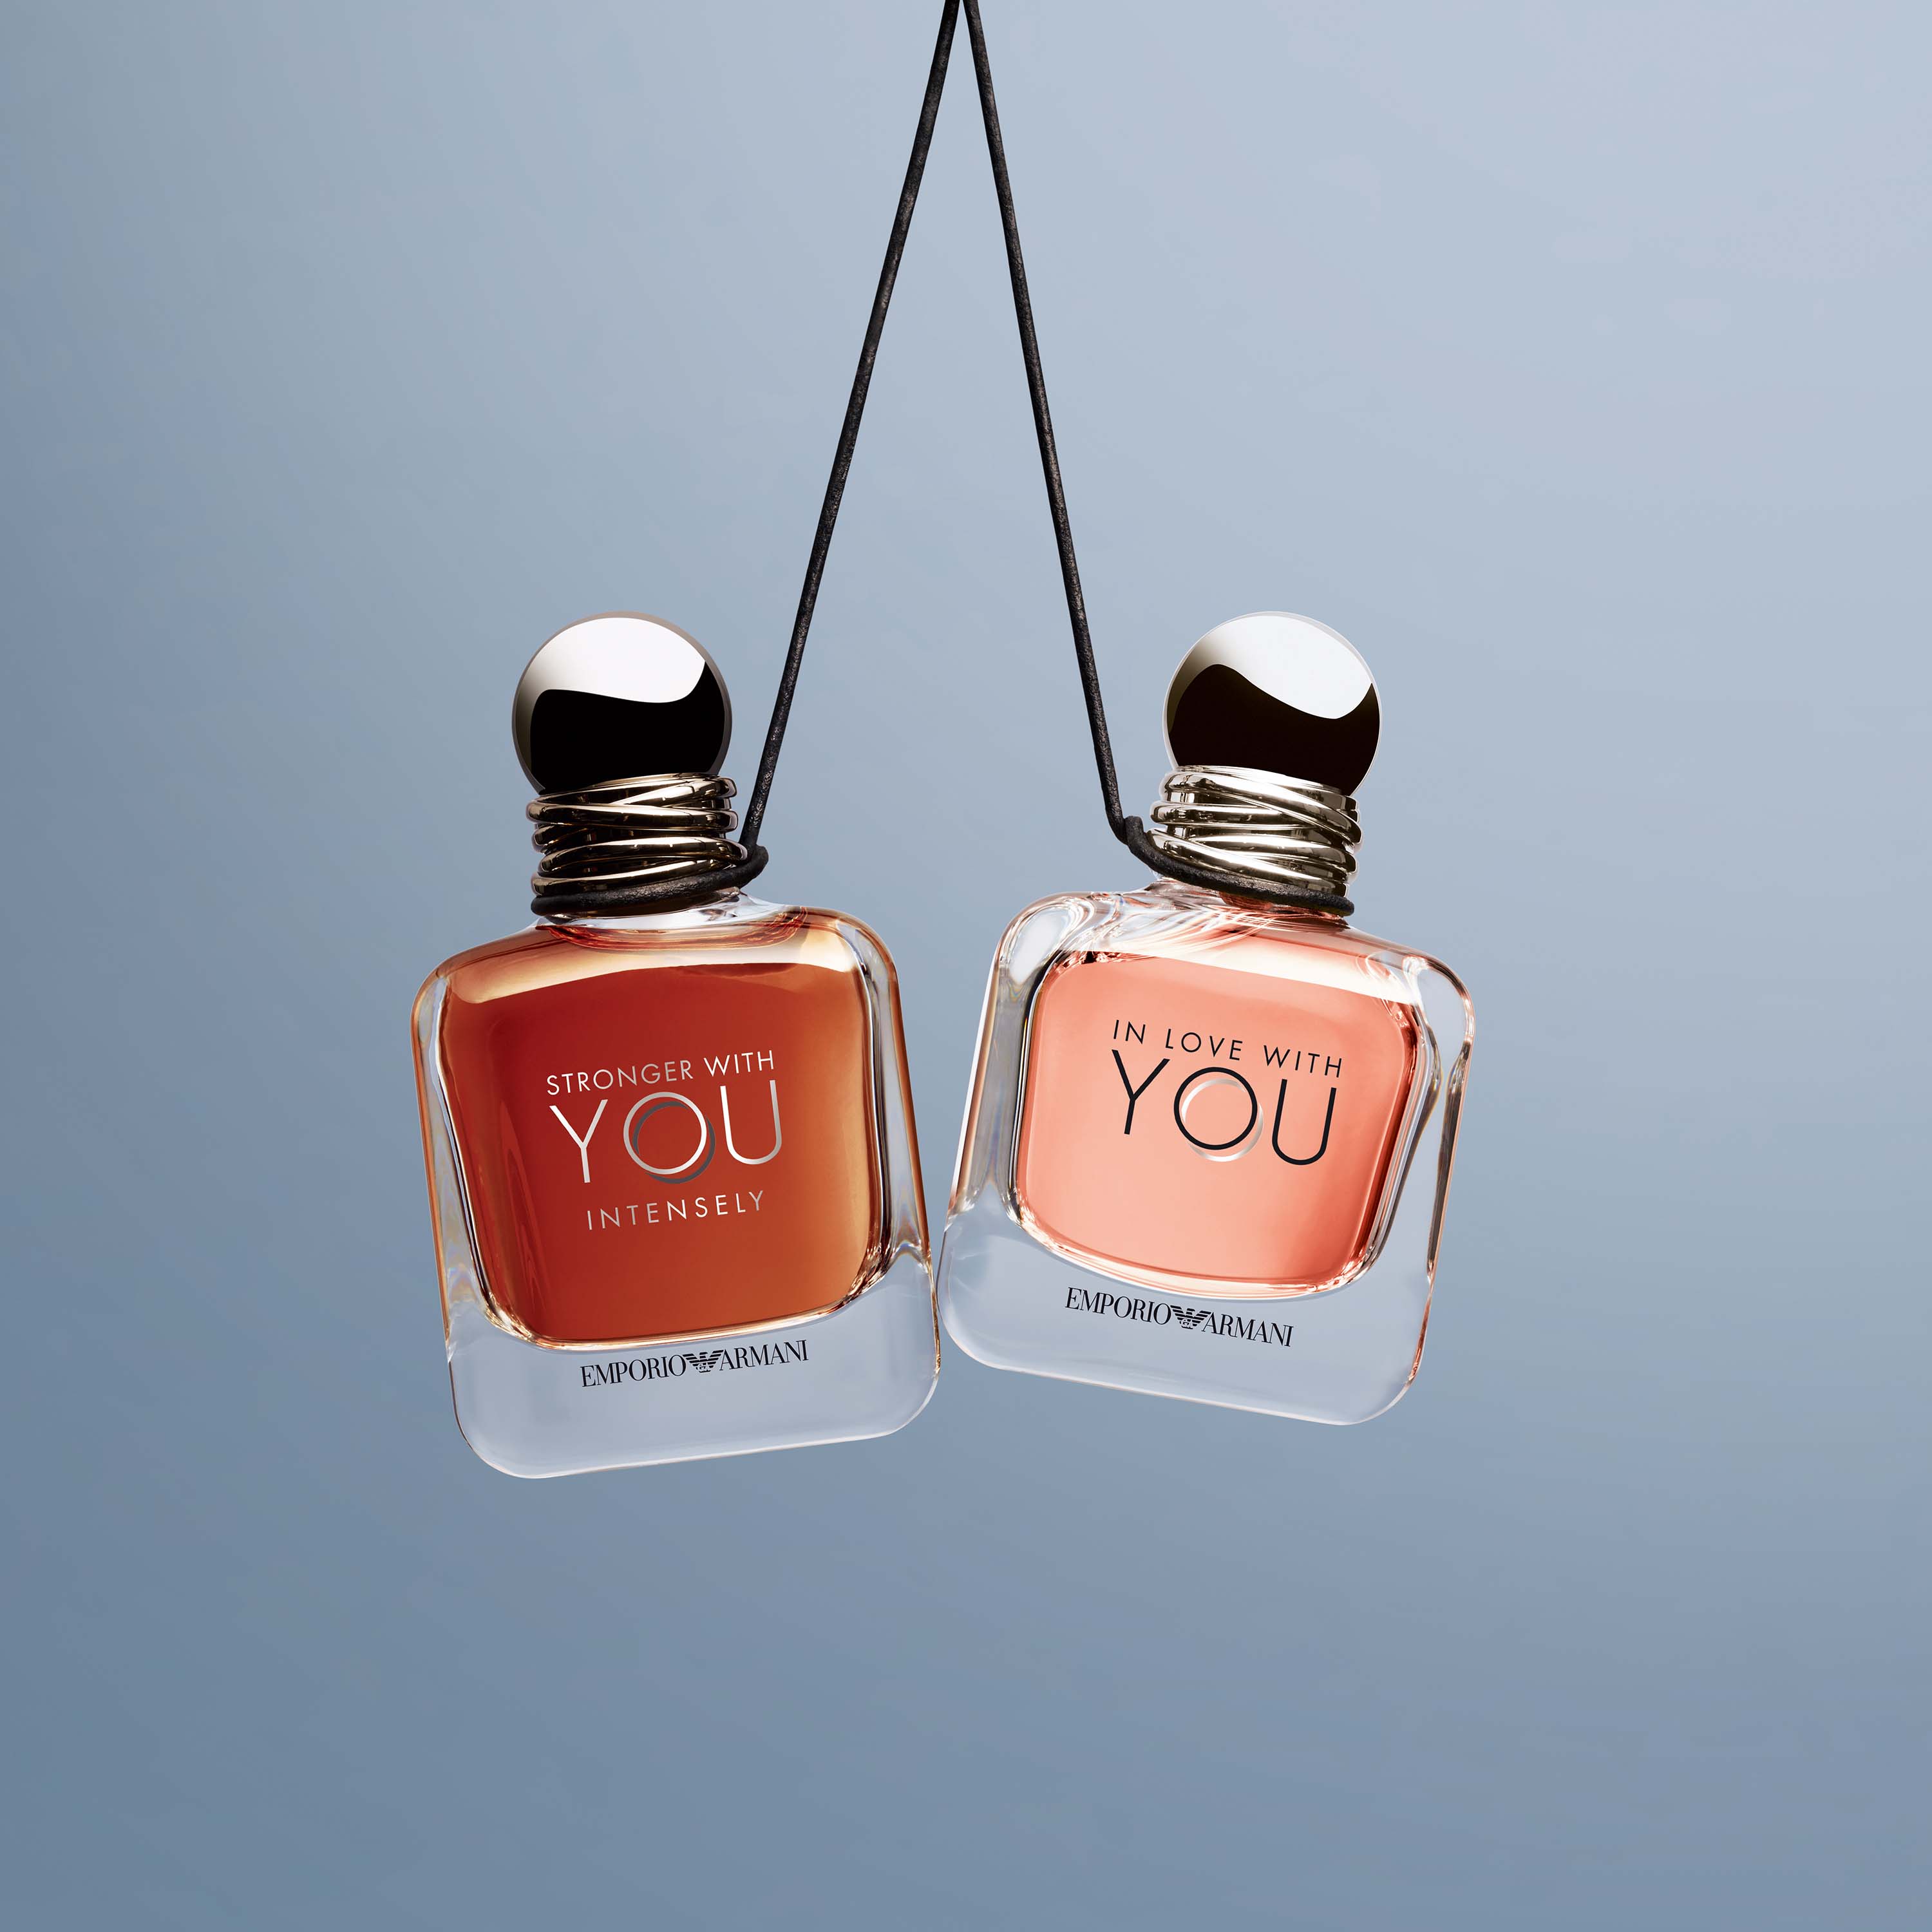 Parfum Stronger With You - Homecare24